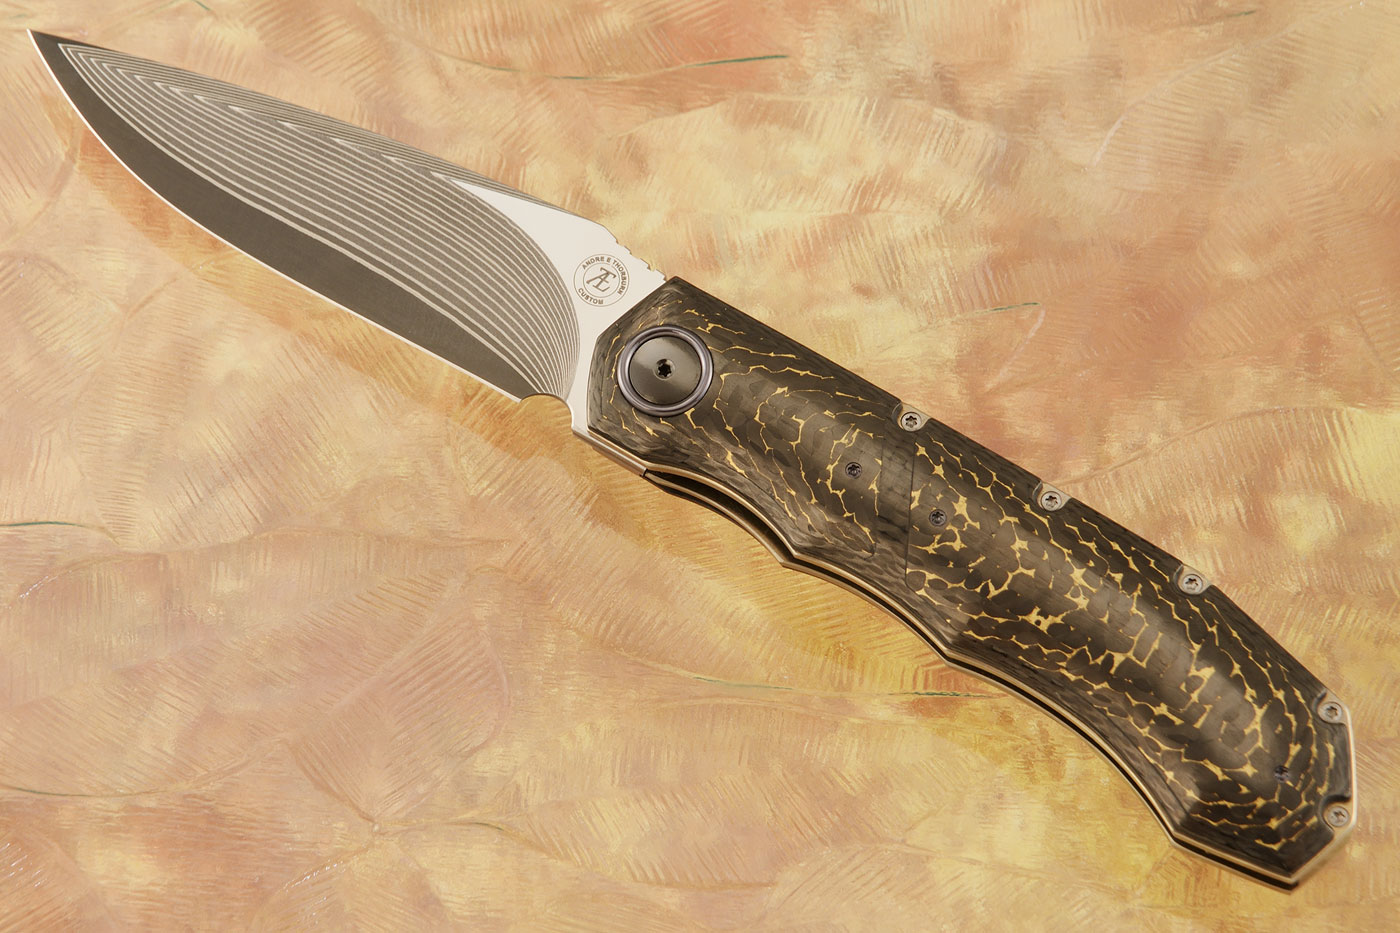 L51 Compact Front Flipper with Carbon Fiber and Gold Snakeskin FatCarbon (Ceramic IKBS) - SG2 Damascus San Mai